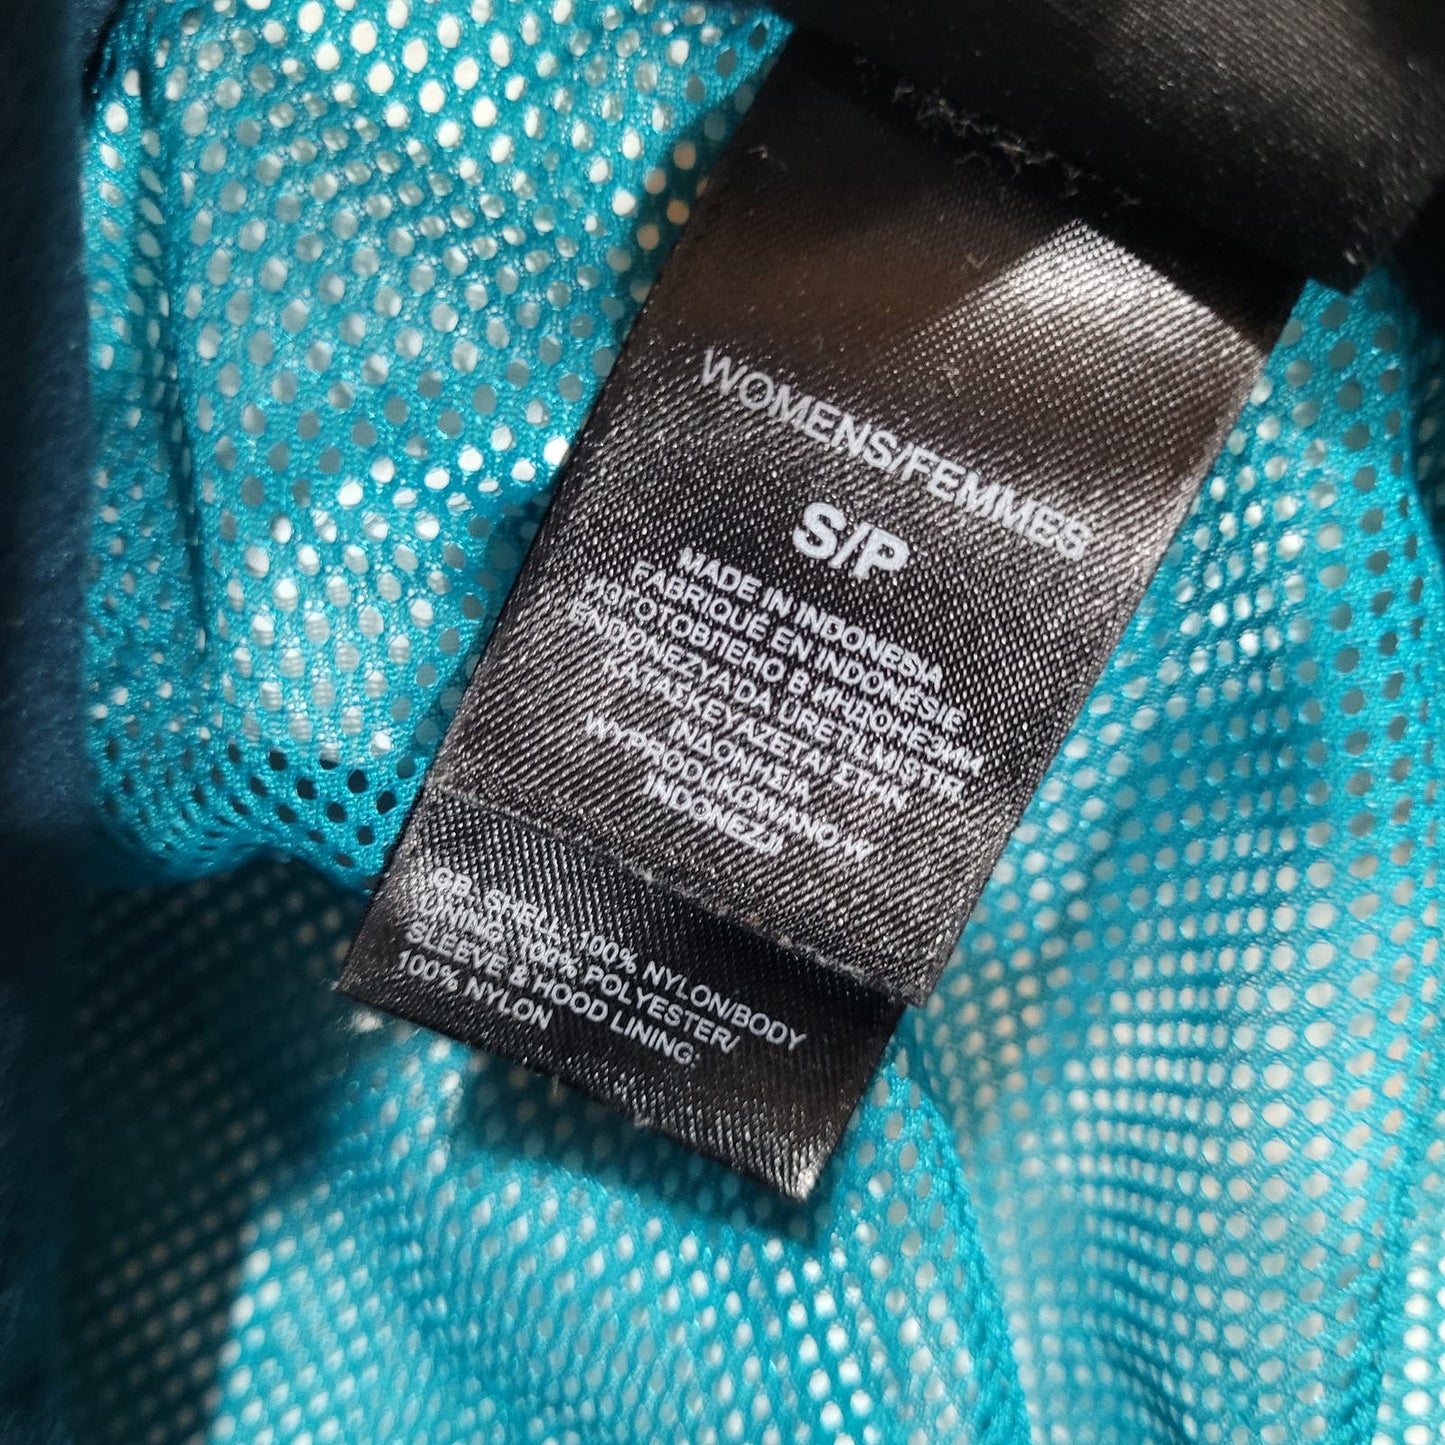 The North Face Resolve Jacket in Jaiden Green - Size Small